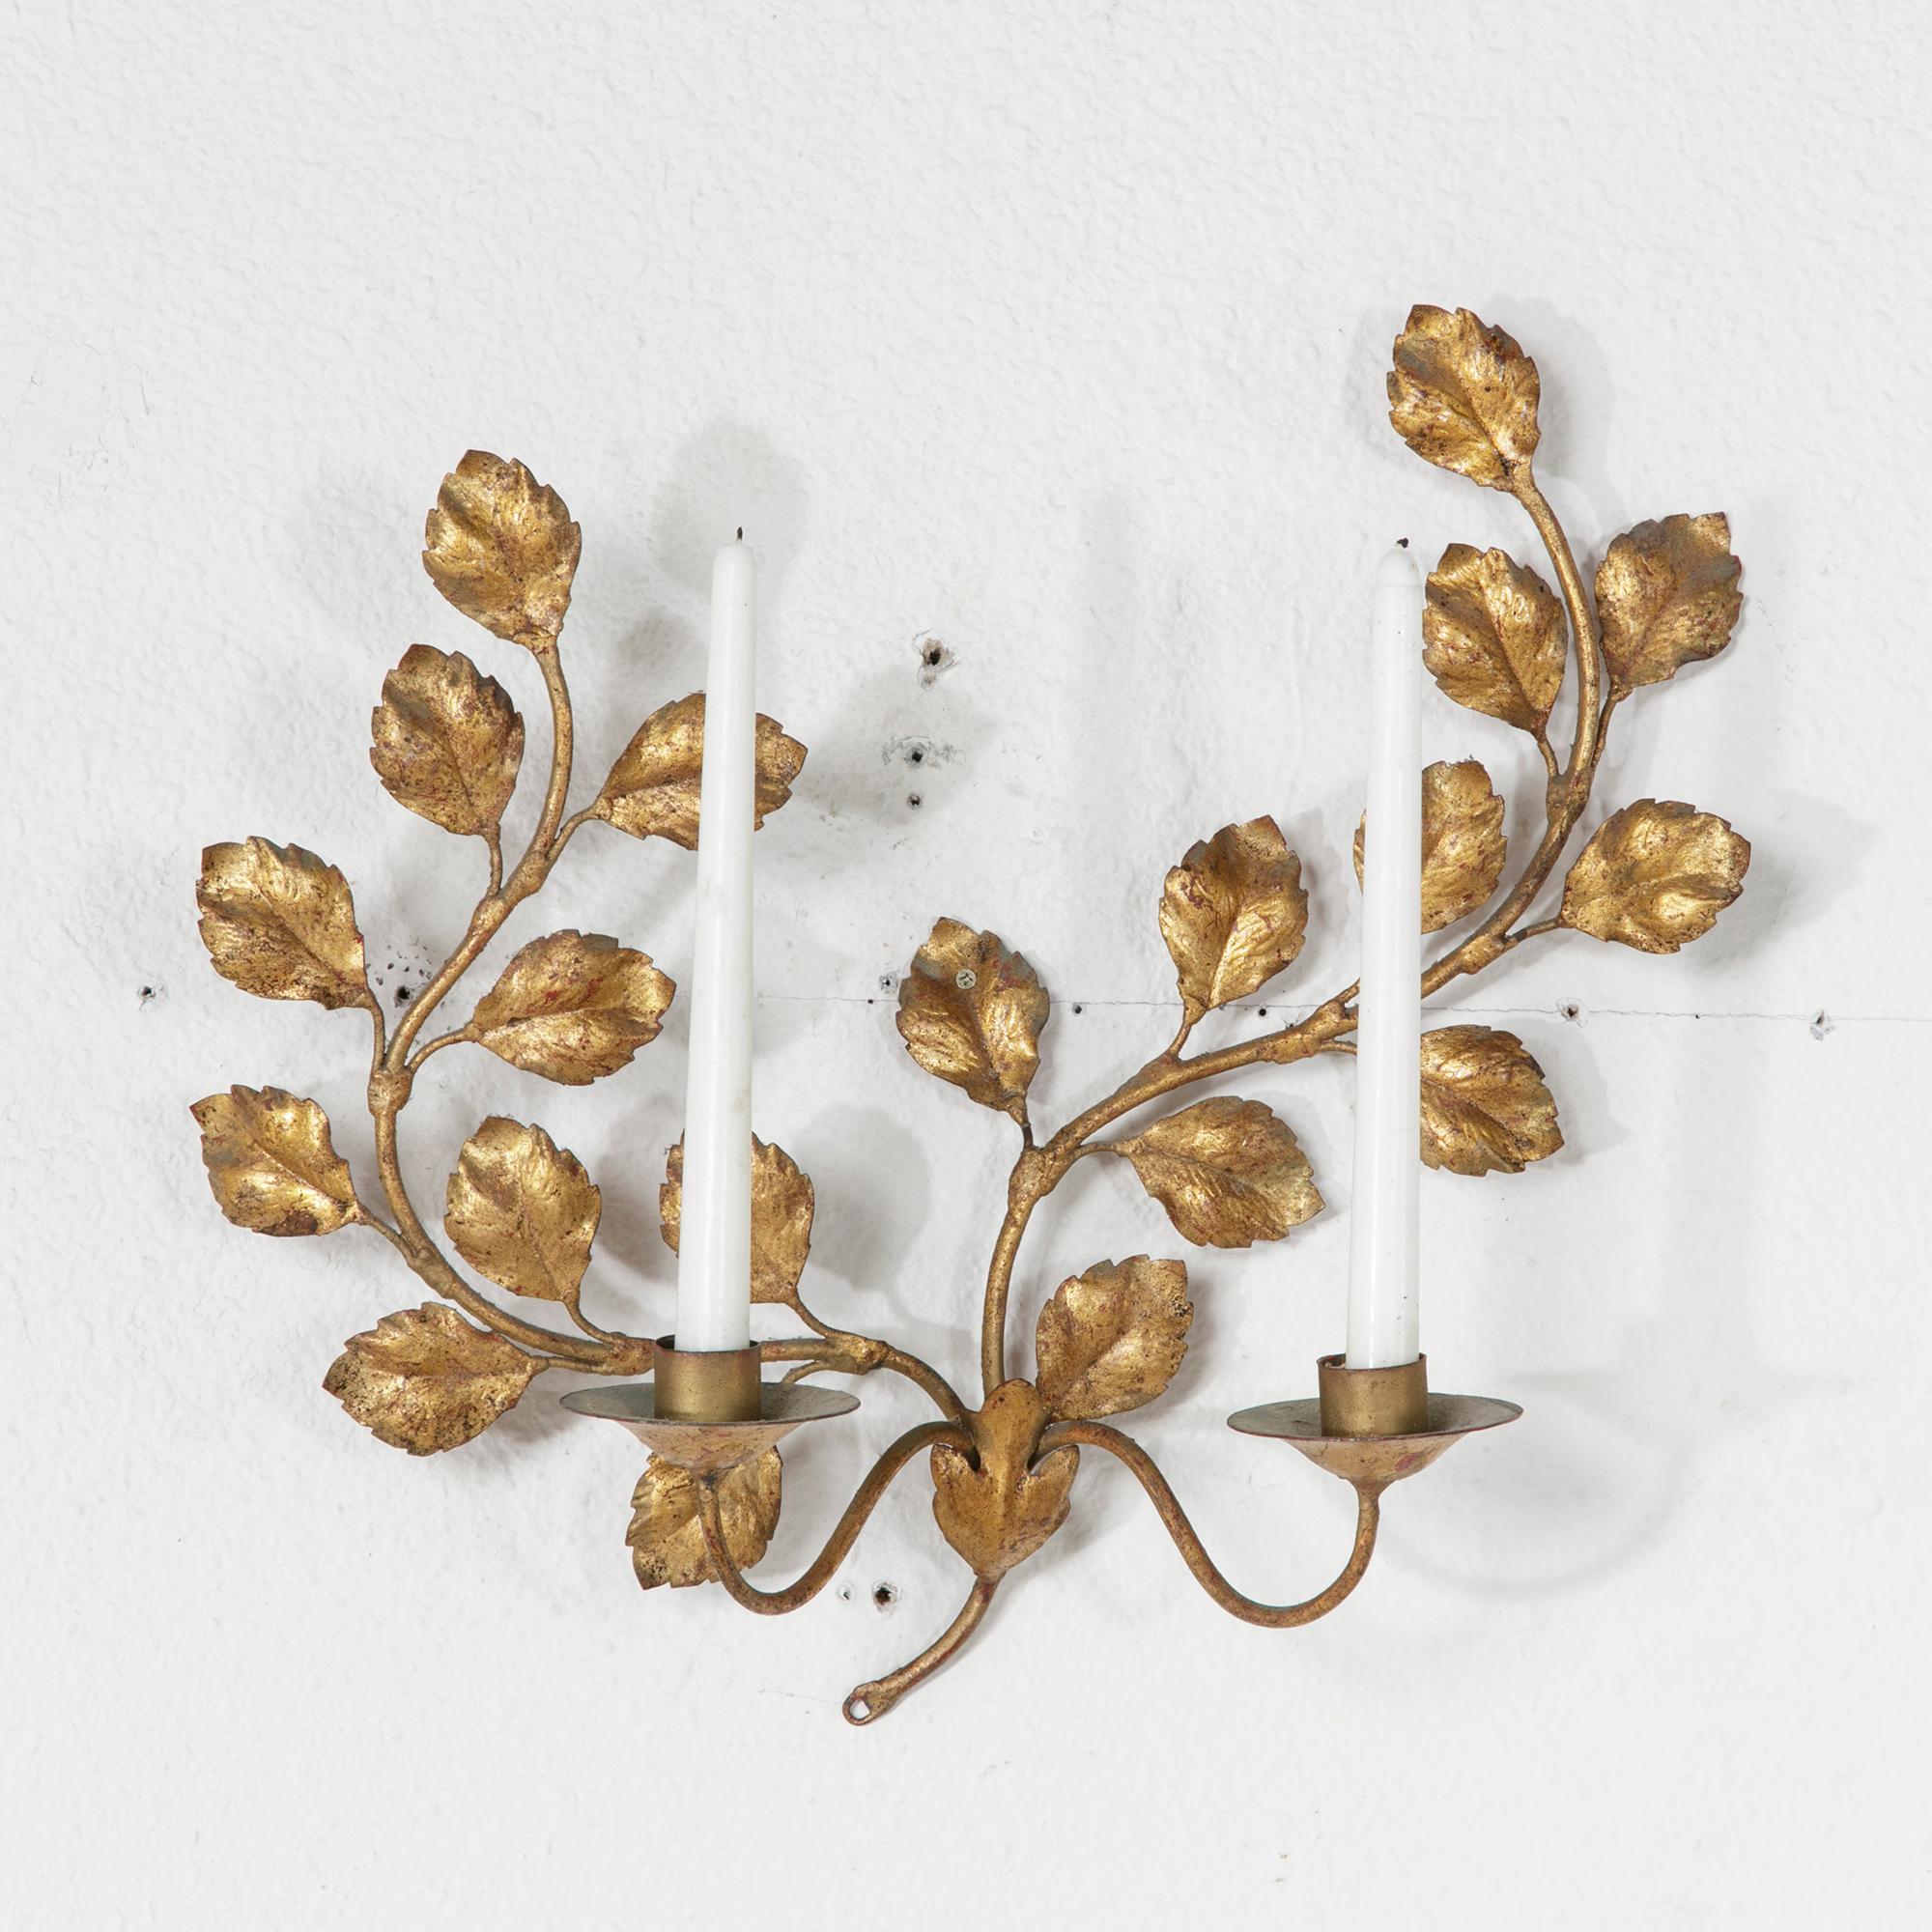 This mid-twentieth century French gilt metal wall sconce is attributed to the French design house, Maison Bagues. The sconce is fitted for two candles and features scrolling branches of leaves. c. 1960.